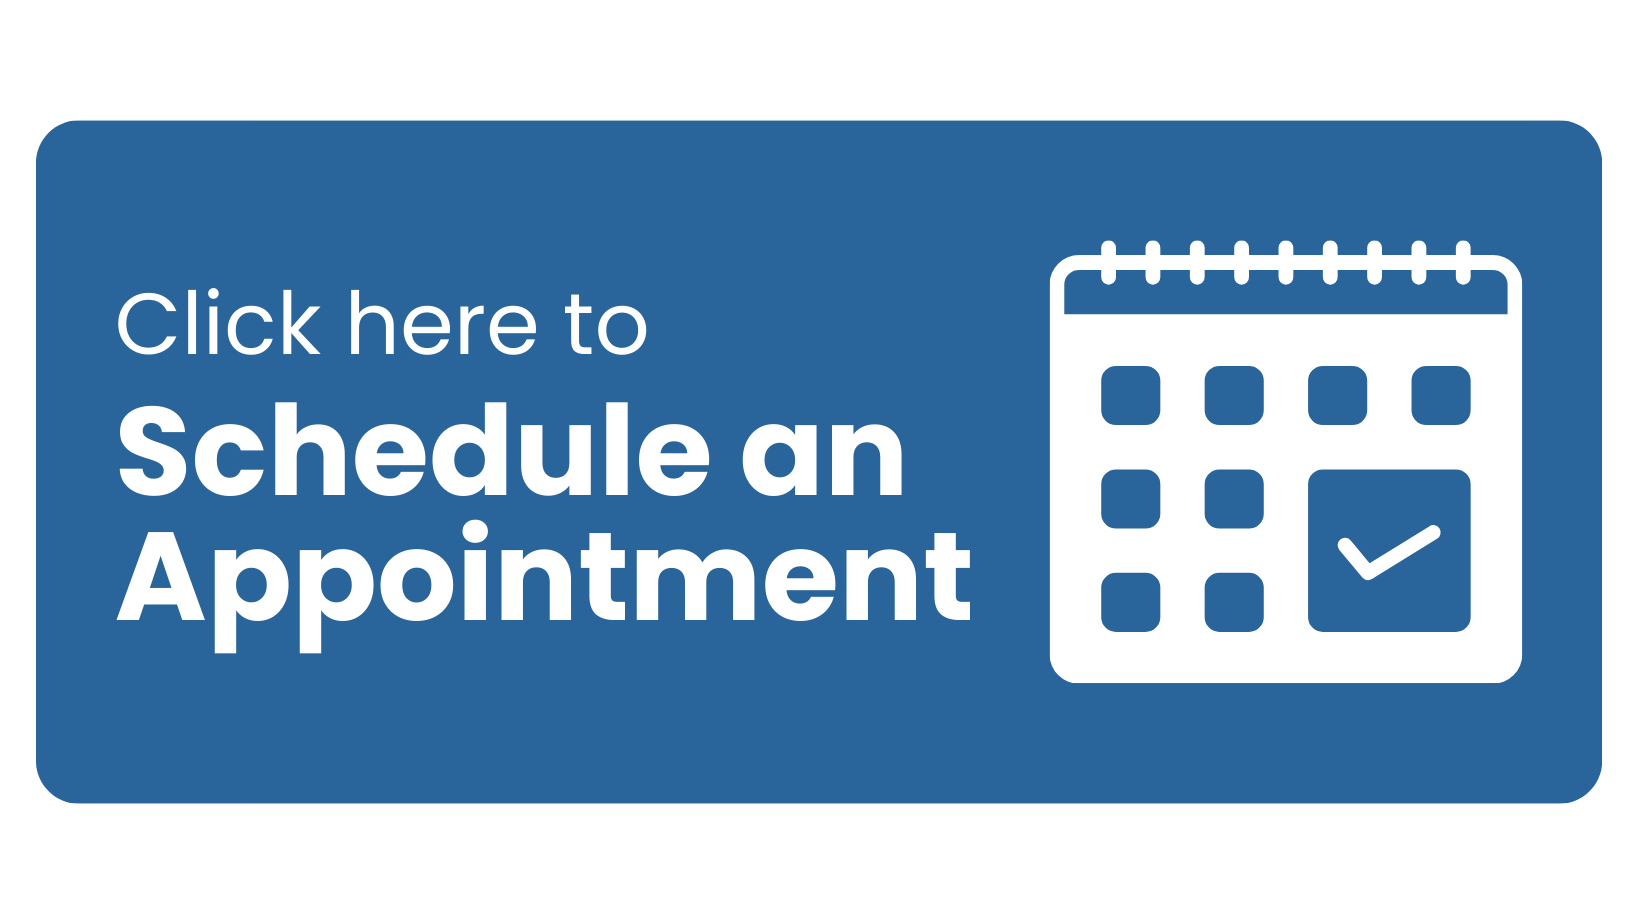 This is a button to book an appointment.